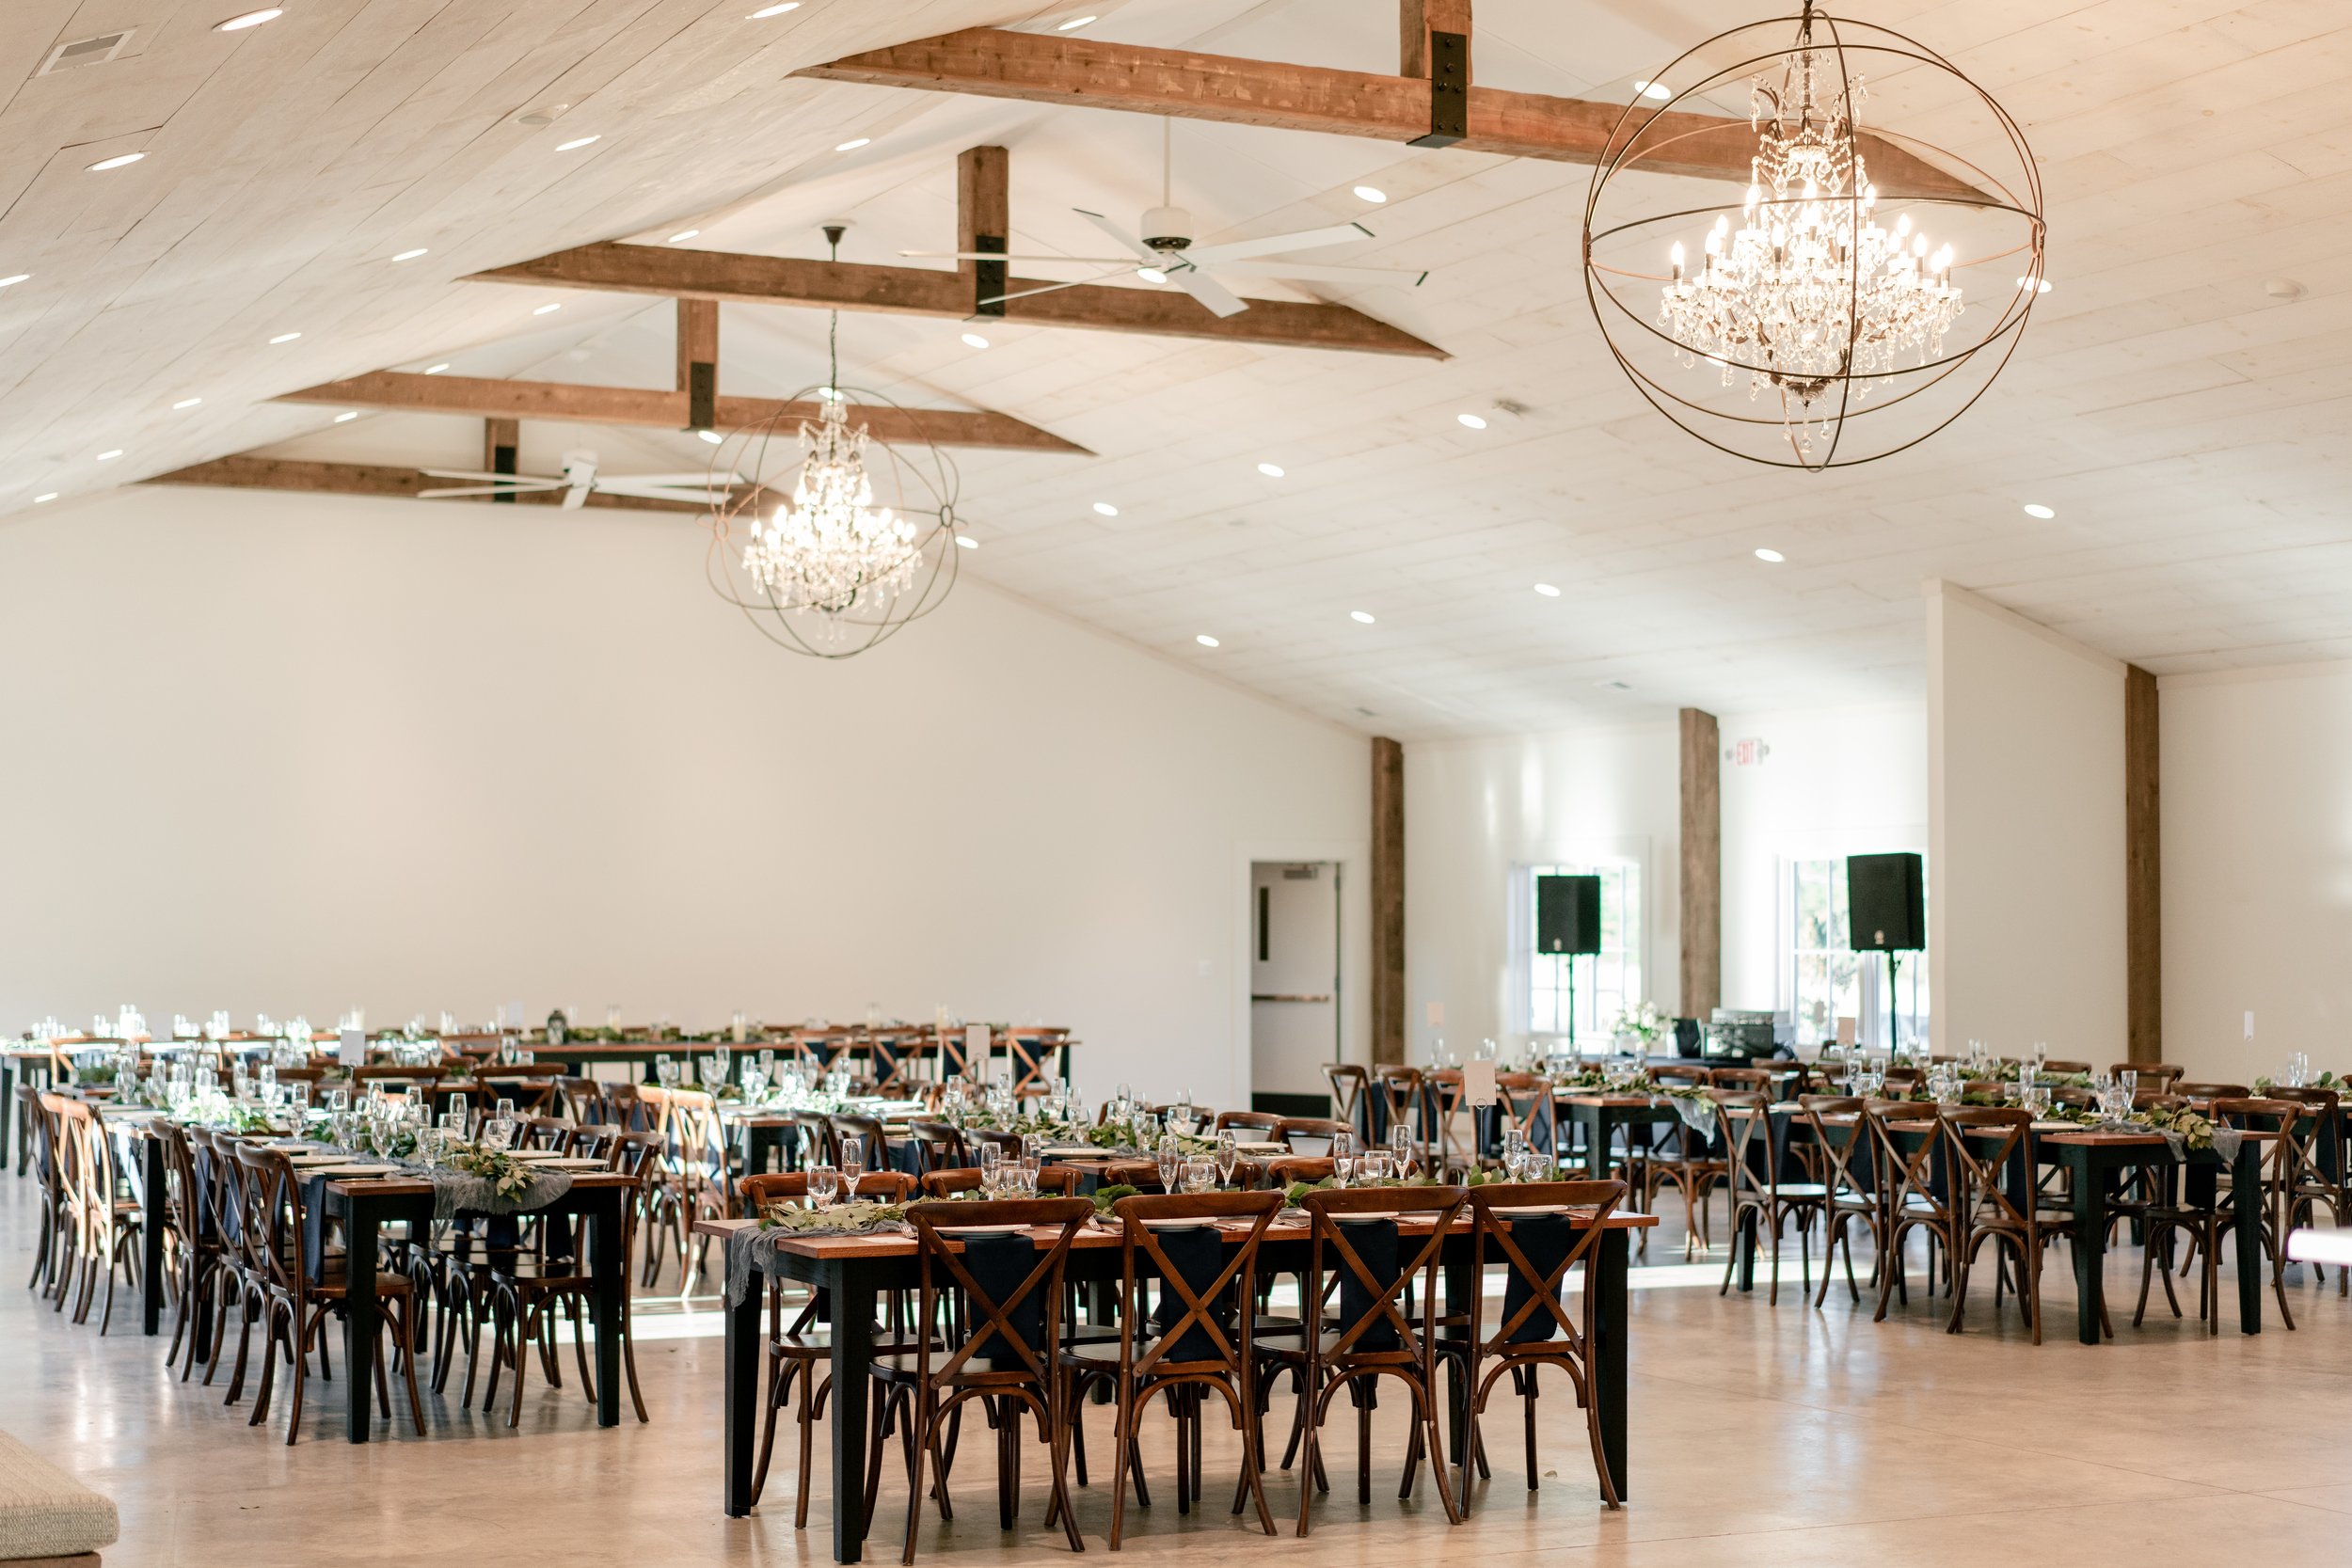 A wide angle view of a wedding reception at Fleetwood Farm Winery in Loudoun County